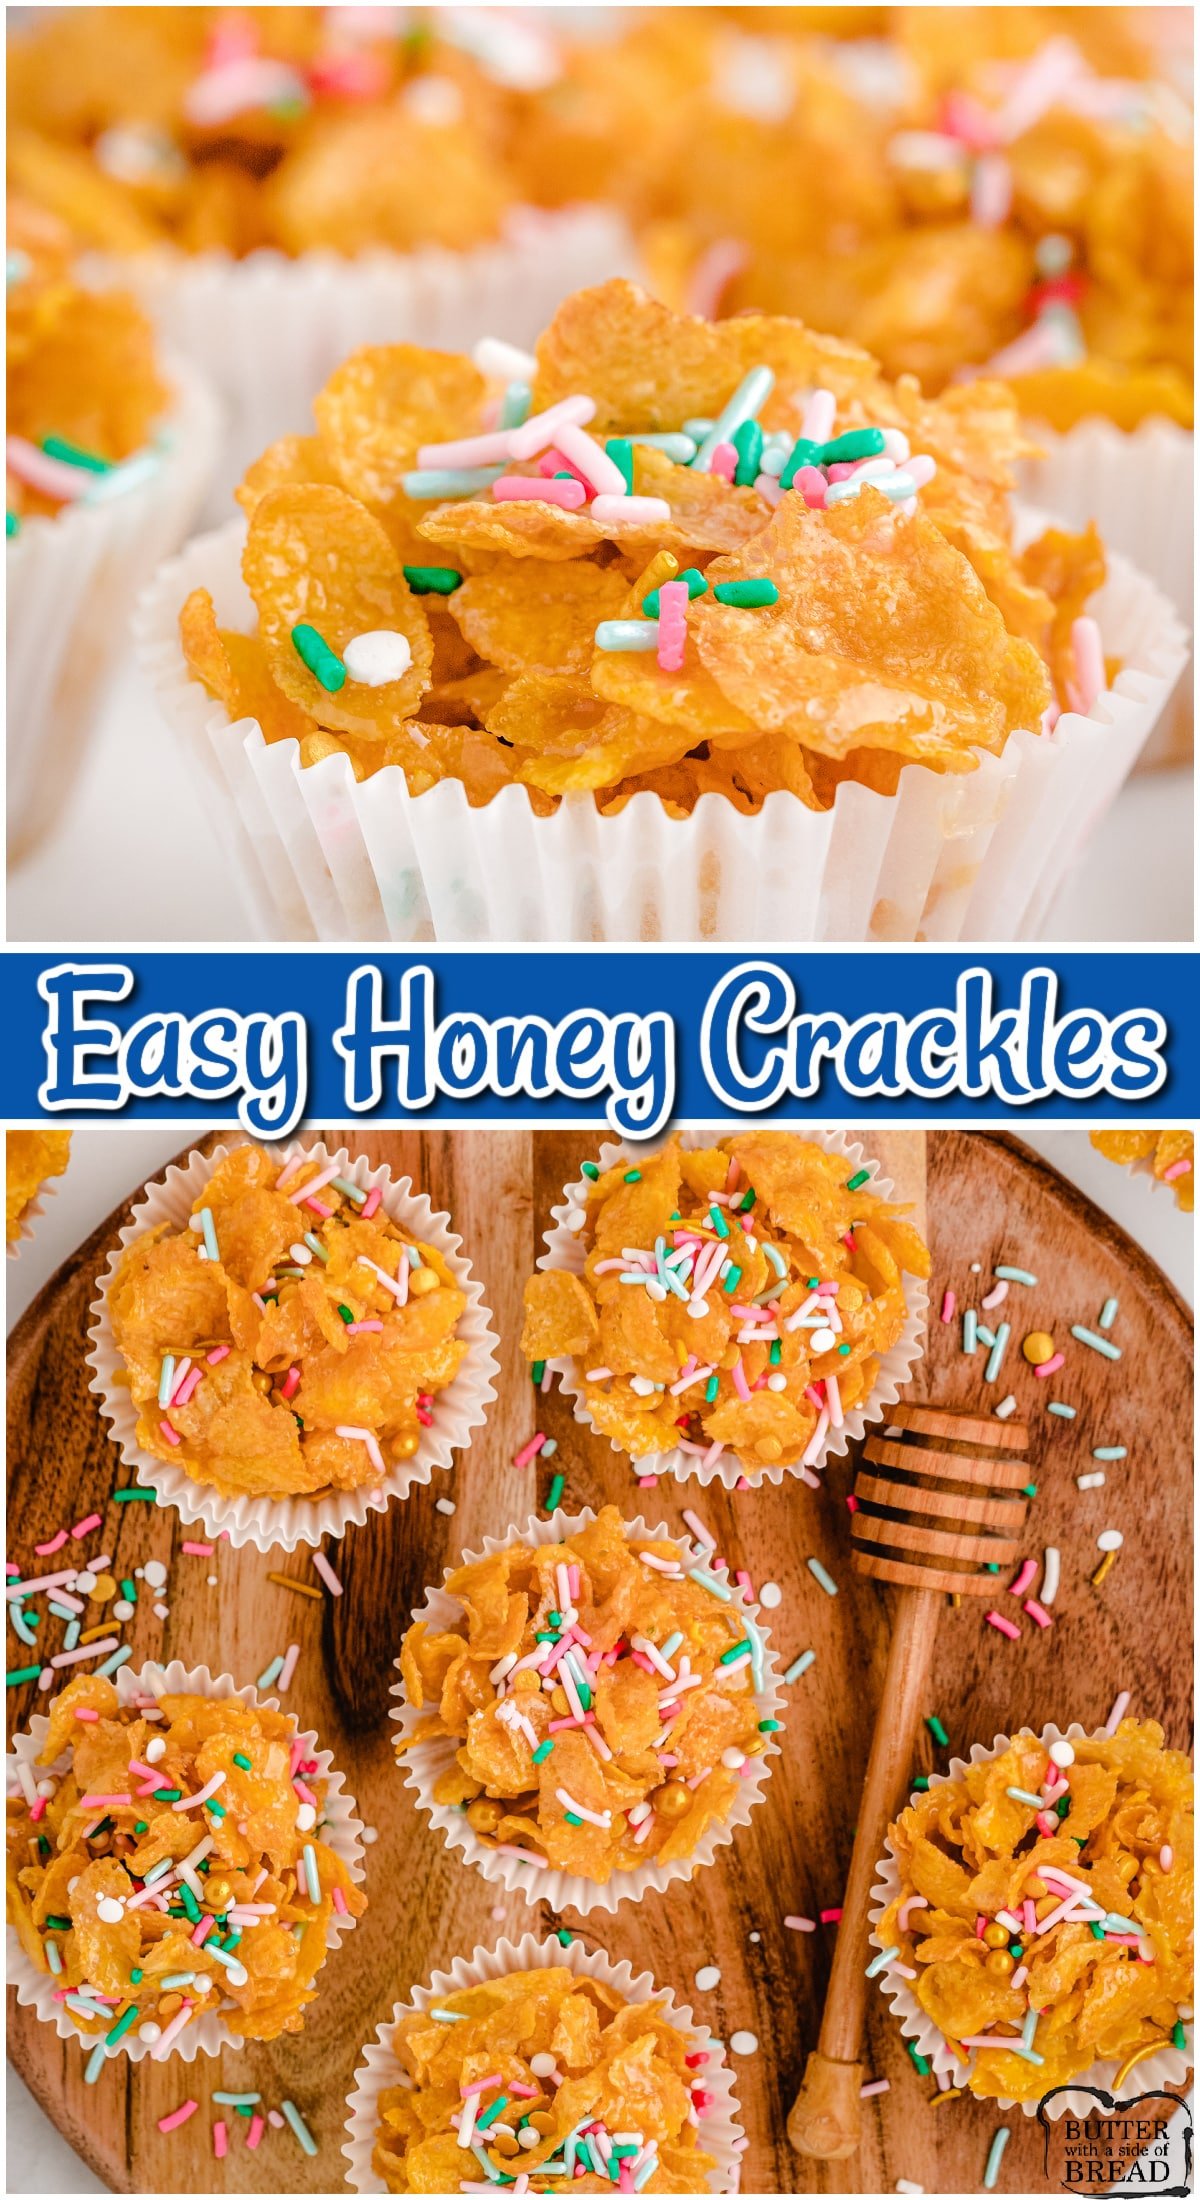 Honey Crackles made in minutes with just 4 ingredients: cornflakes, sugar, butter & honey! Simple recipe for a fun, tasty treat everyone enjoys!